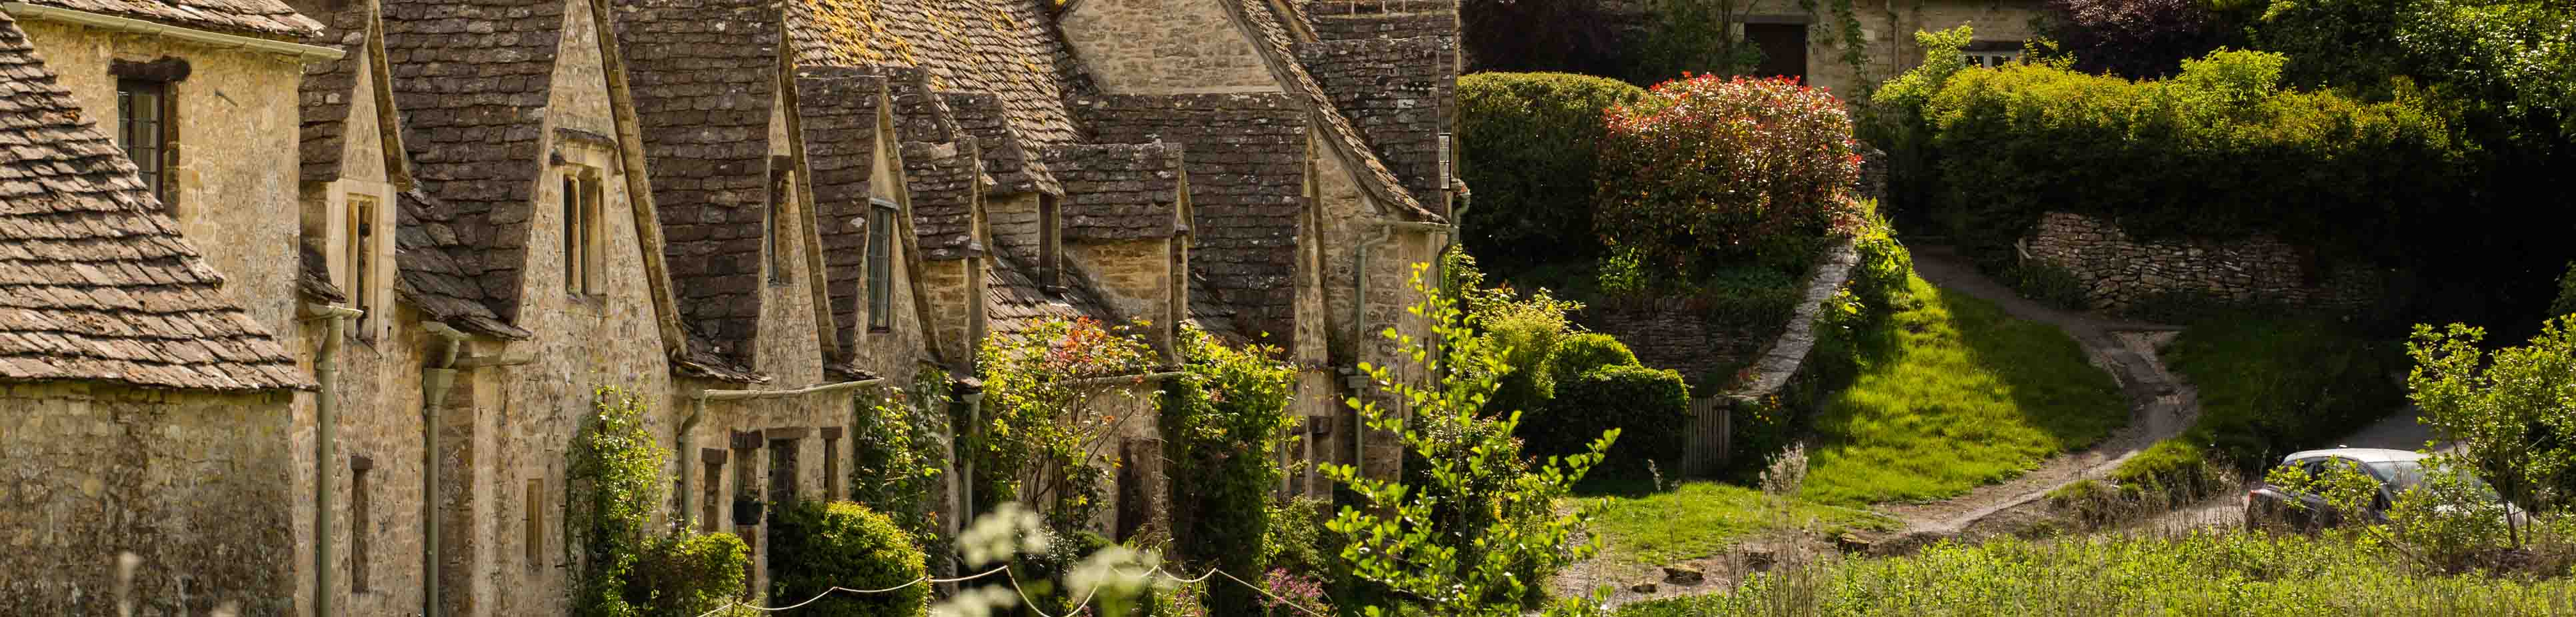 Cottages in The Cotswolds